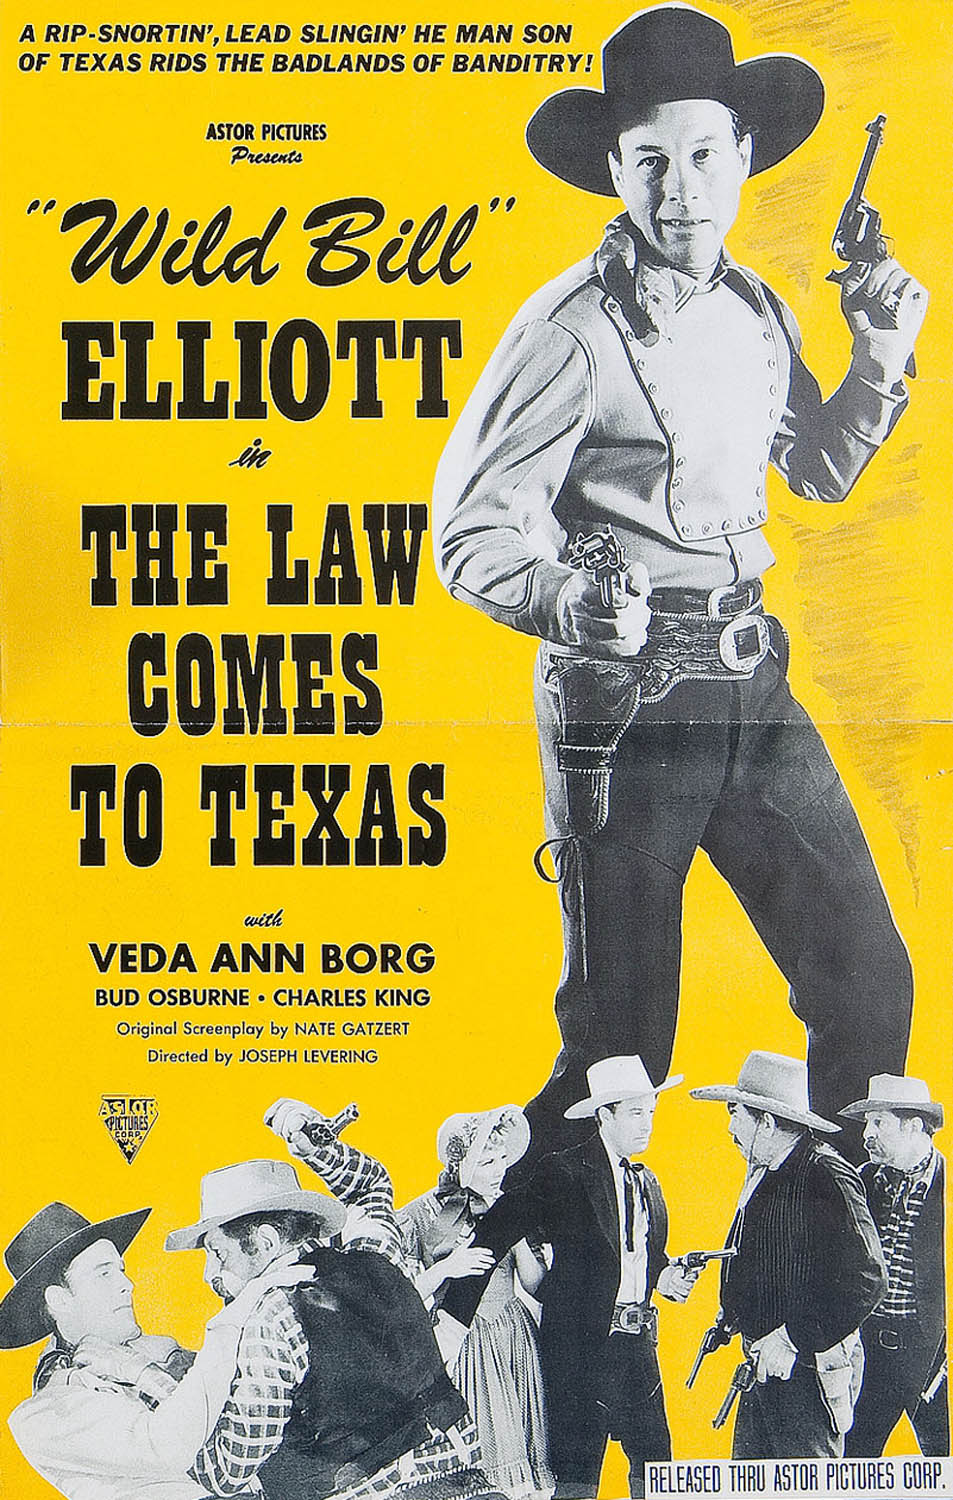 LAW COMES TO TEXAS, THE